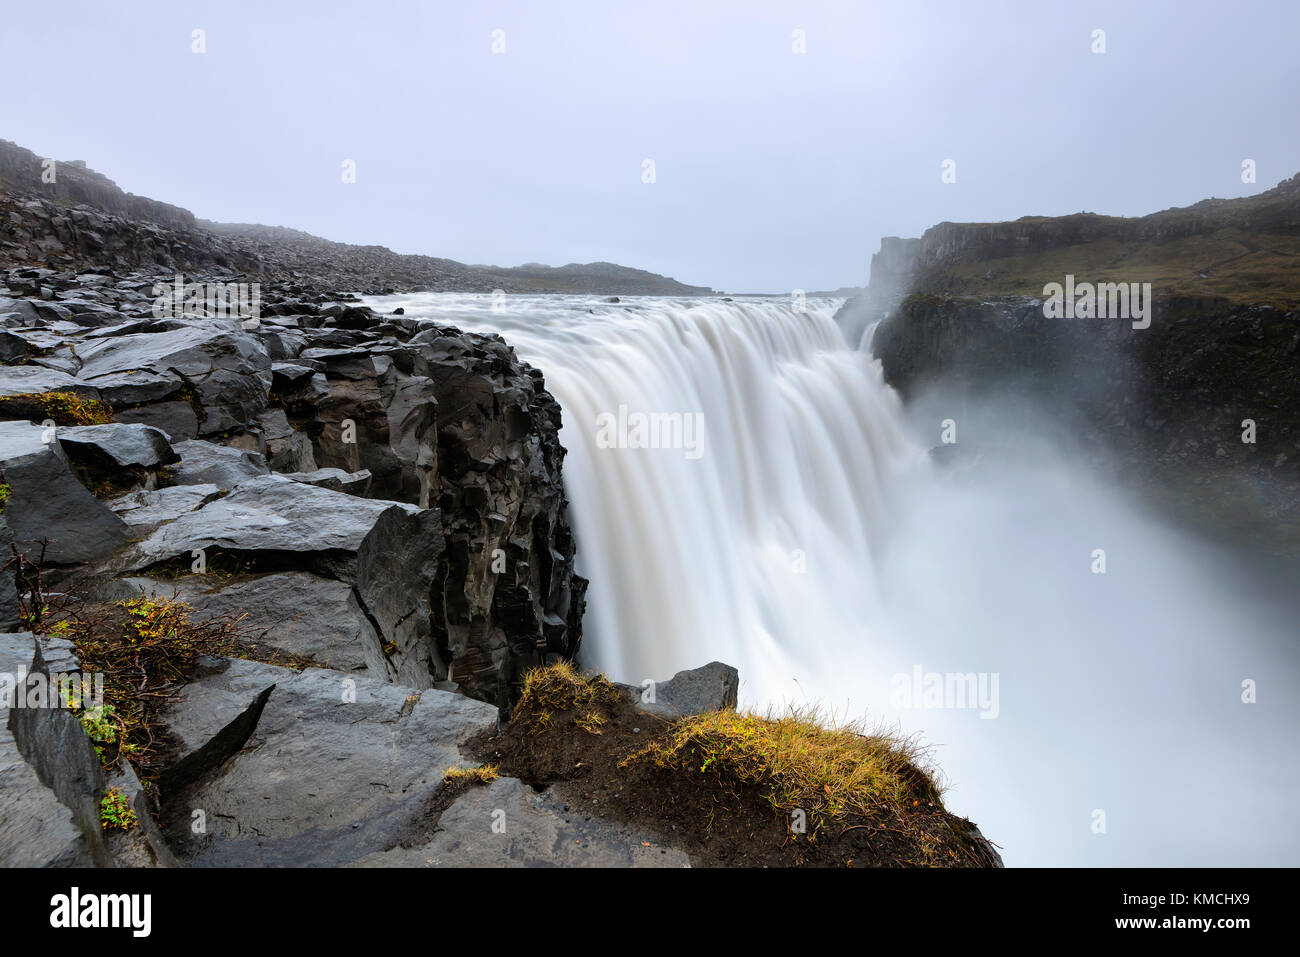 Dettifoss is a waterfall in Vatnajokull National Park in Iceland, and is the most powerful waterfall in Europe. Amazing landscape at sunrise. Stock Photo